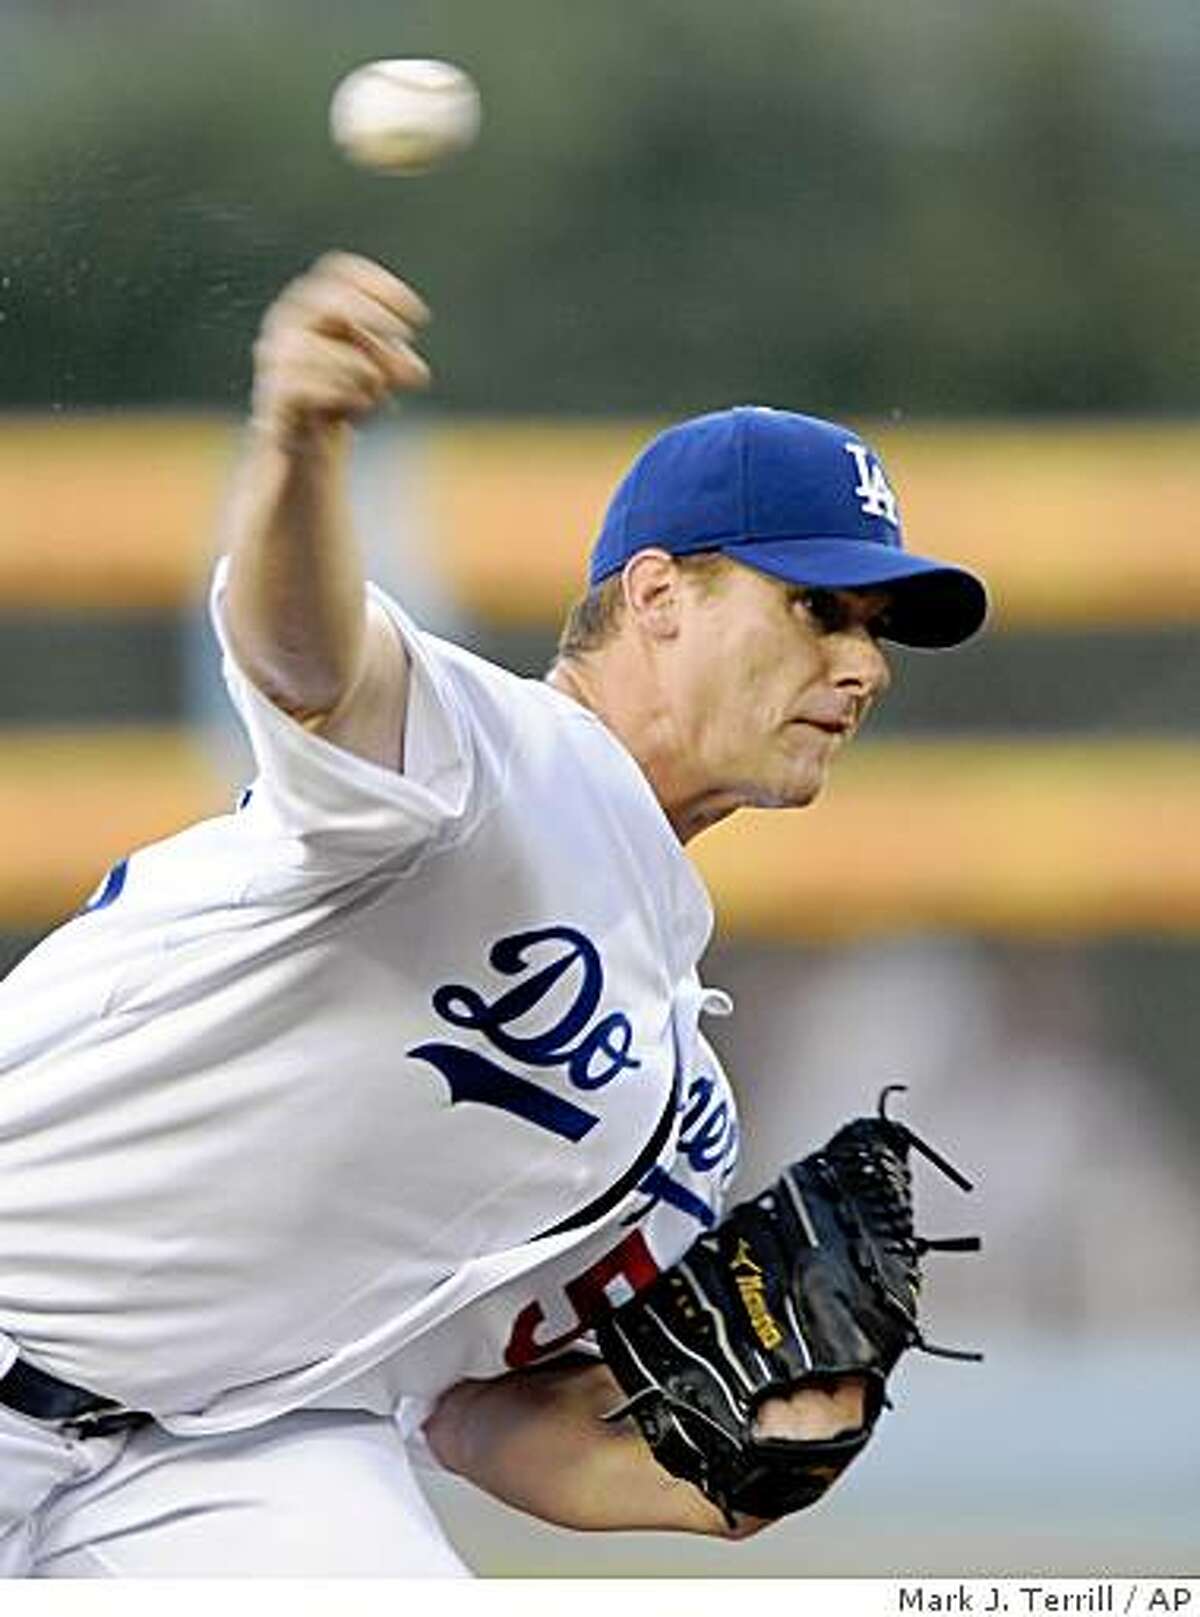 Los Angeles Dodgers starting pitcher Chad Billingsley throws to the plate during the first inning of a Major League Baseball game against the San Francisco Giants, Wednesday, July 30, 2008, in Los Angeles. (AP Photo/Mark J. Terrill)